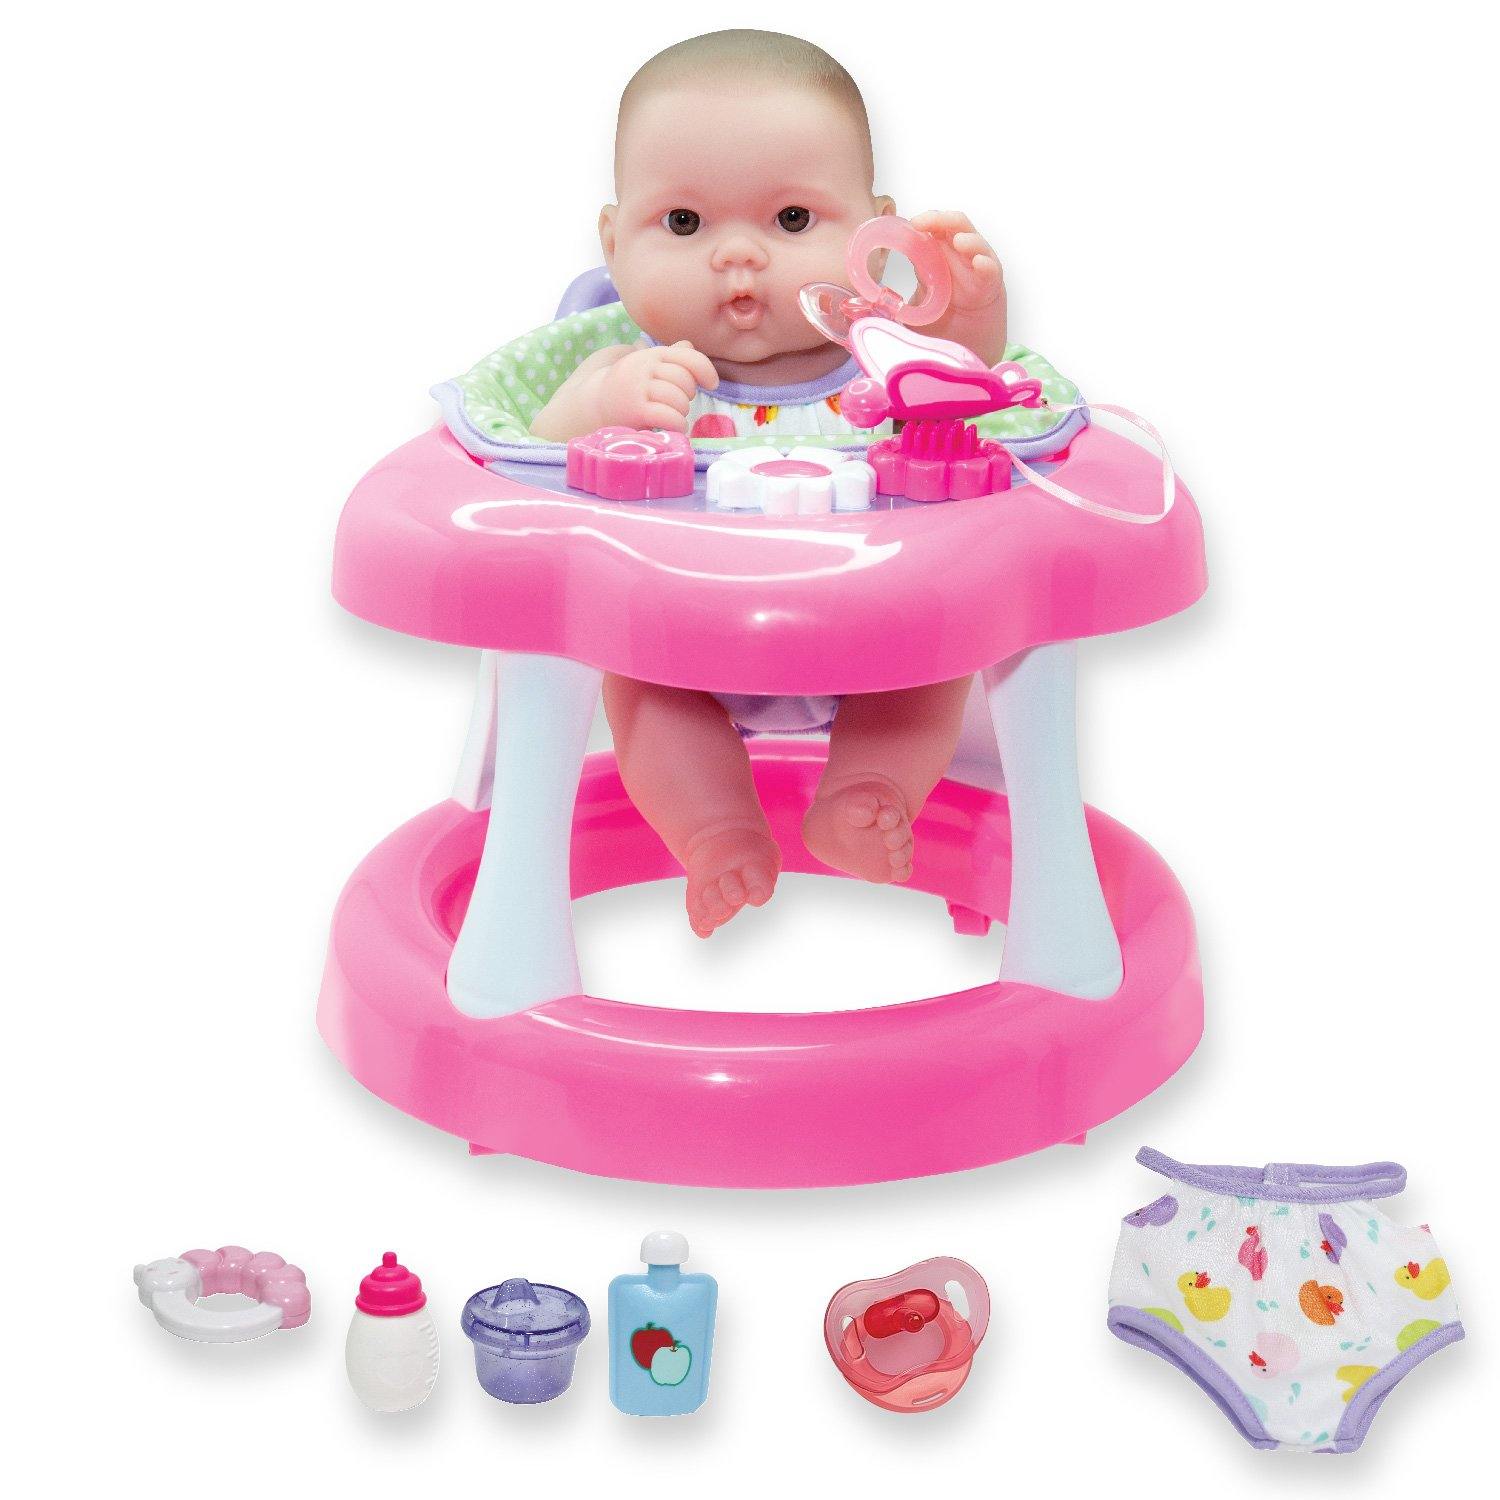 JC Toys, Lots to Love Babies All-Vinyl 14 inches Baby Doll in Walker with Accessories - JC Toys Group Inc.